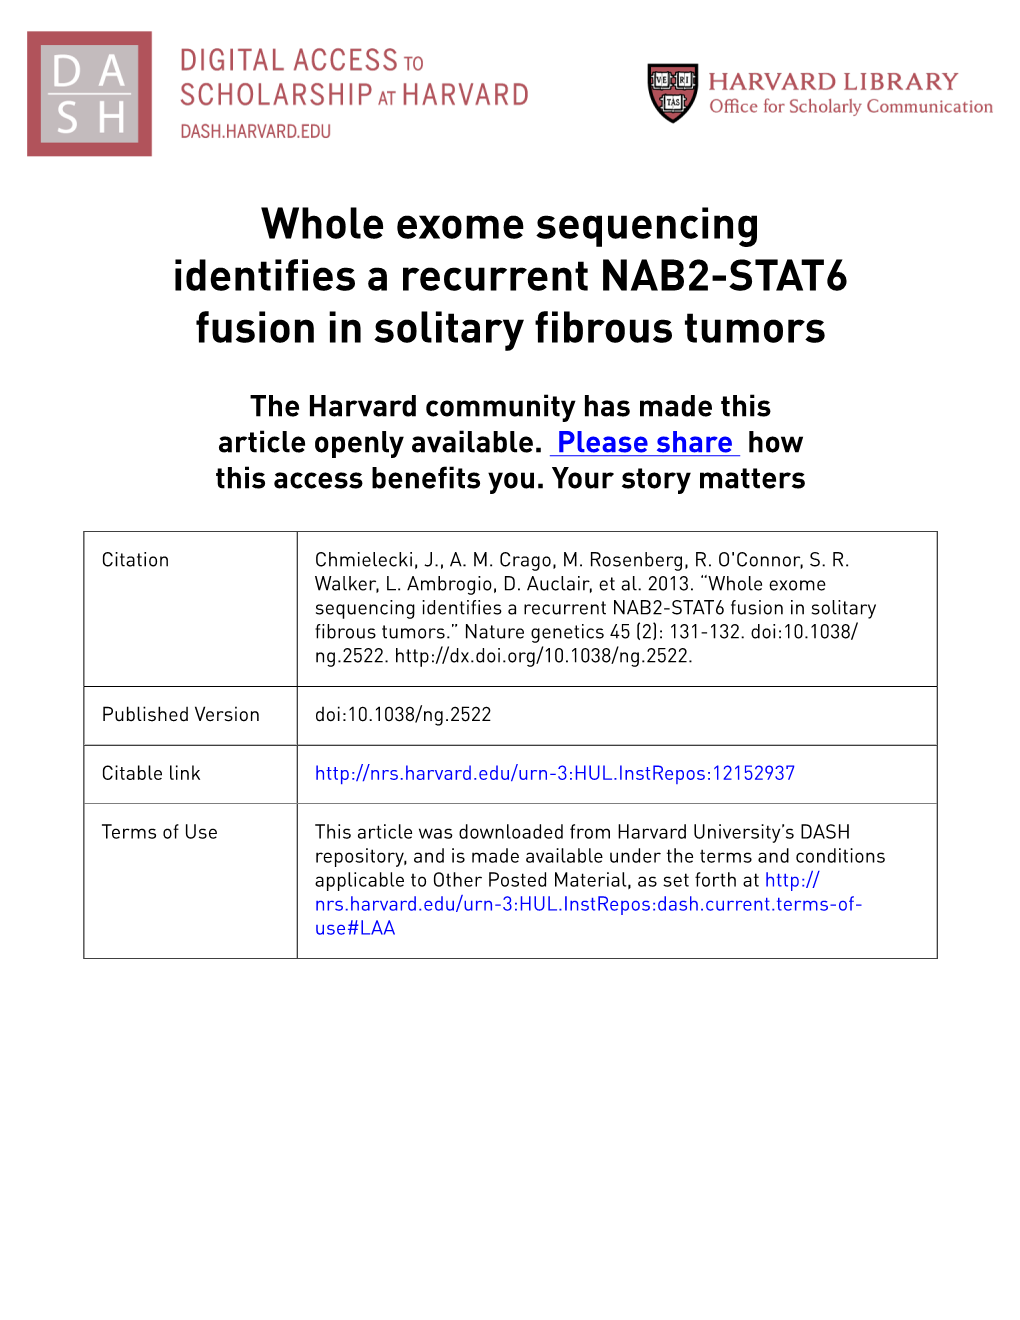 Whole Exome Sequencing Identifies a Recurrent NAB2-STAT6 Fusion in Solitary Fibrous Tumors